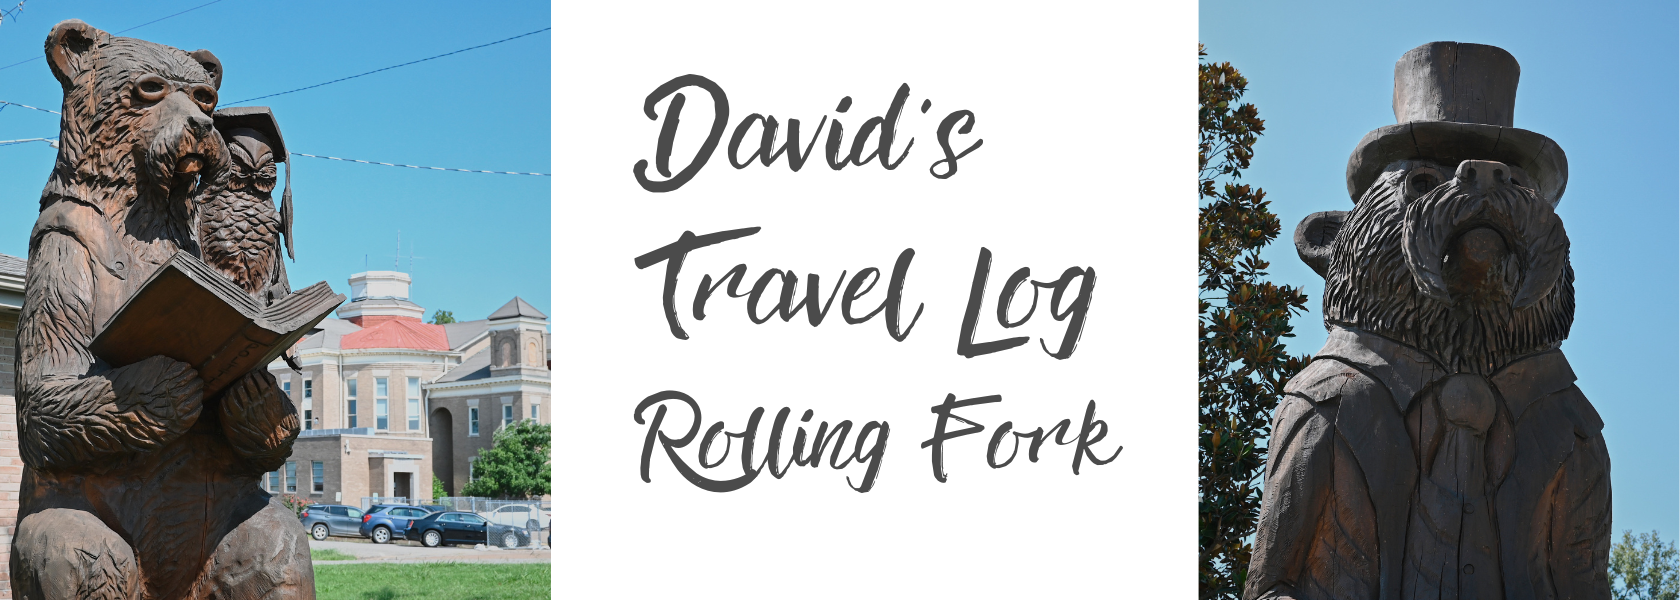 David's Travel Log Rolling Fork with two images of carved bears located in Rolling Fork